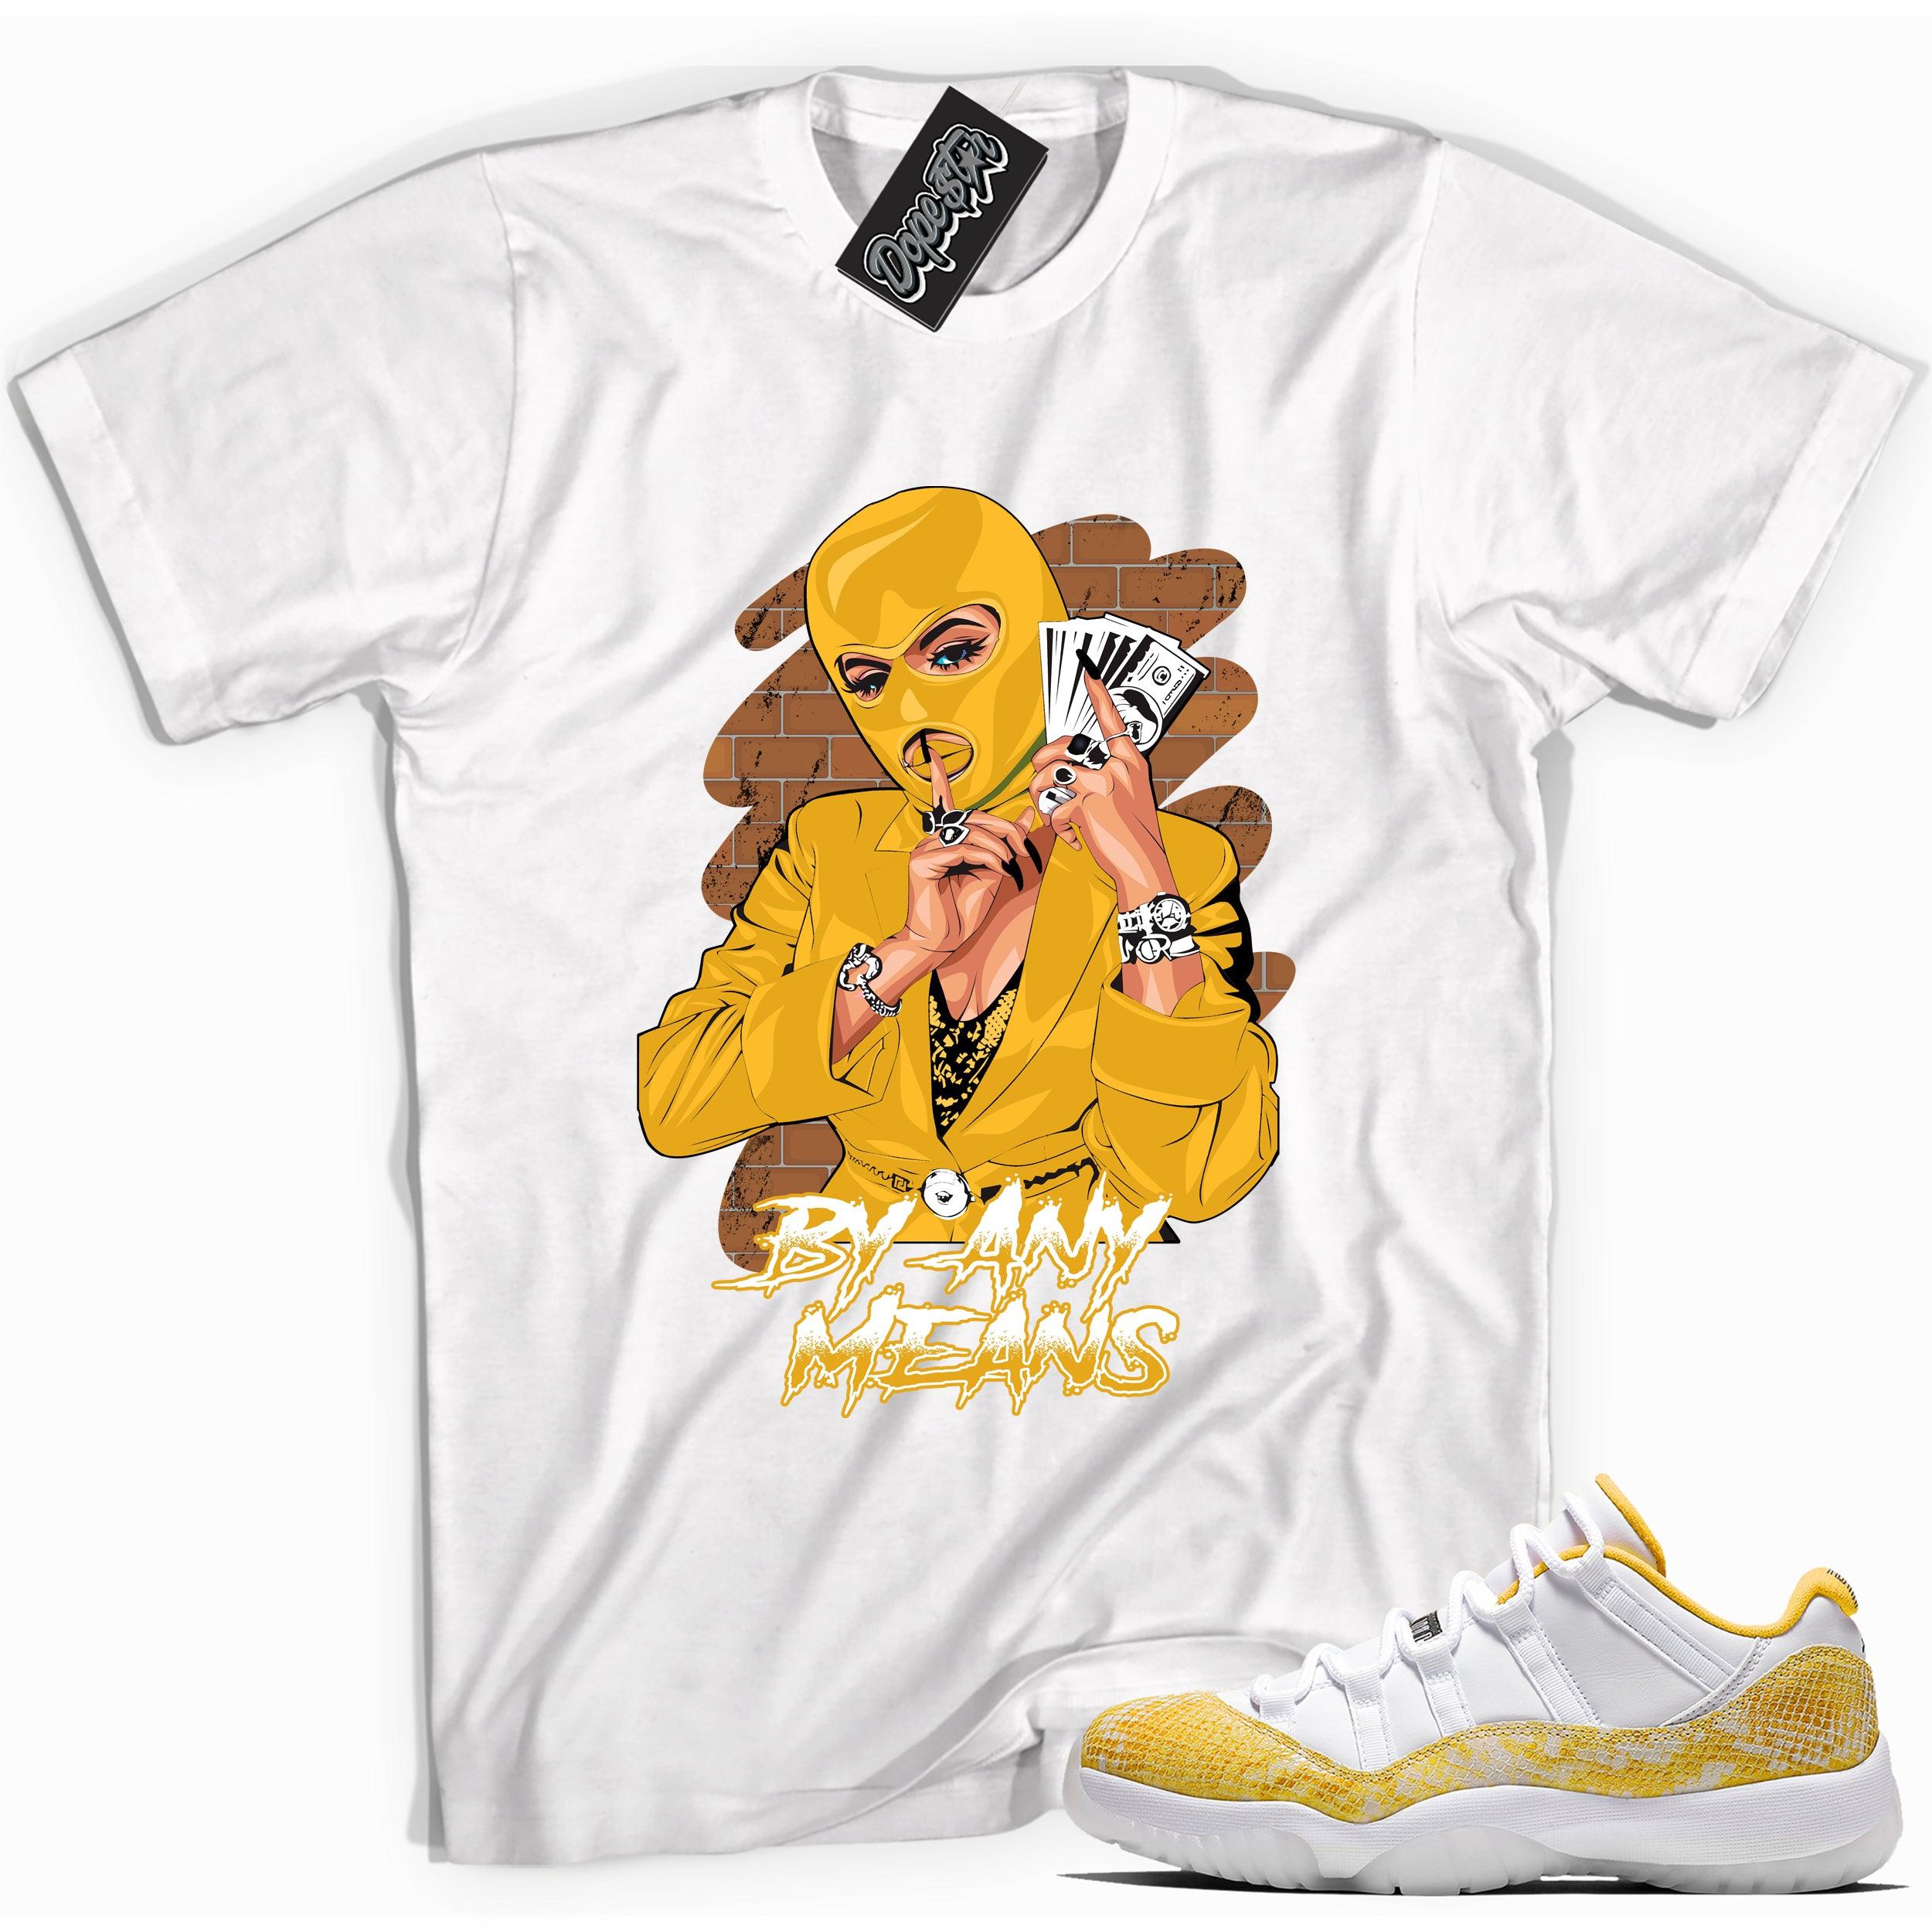 Cool white graphic tee with 'by any means' print, that perfectly matches Air Jordan 11 Low Yellow Snakeskin sneakers